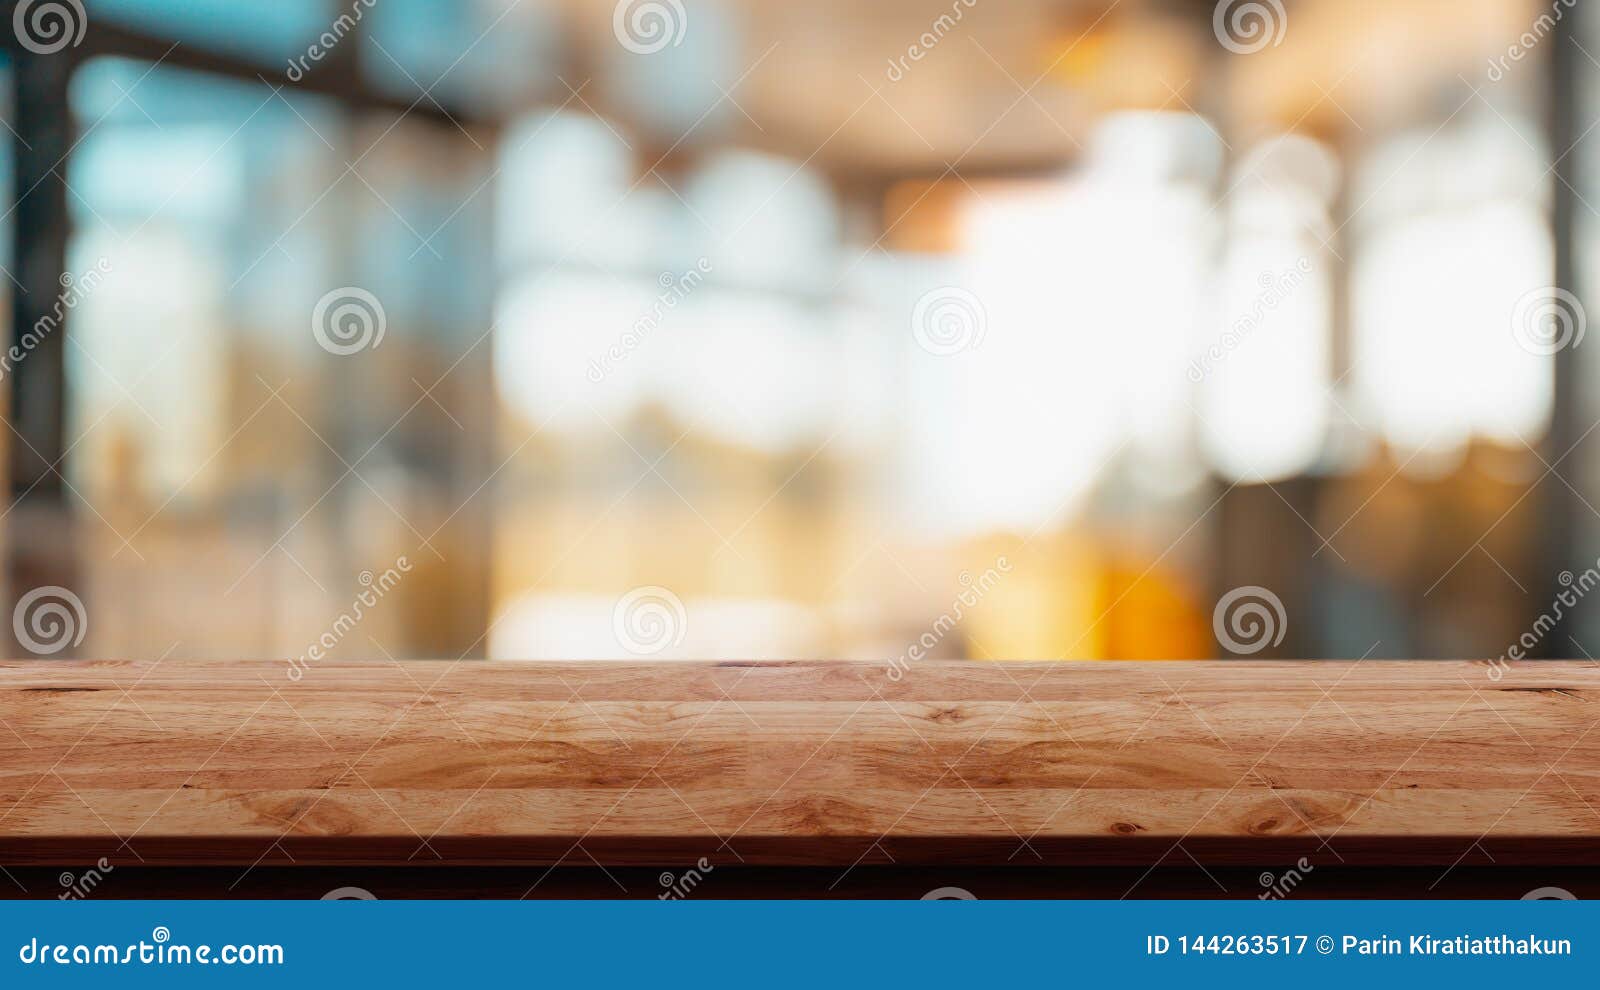 table in living room background